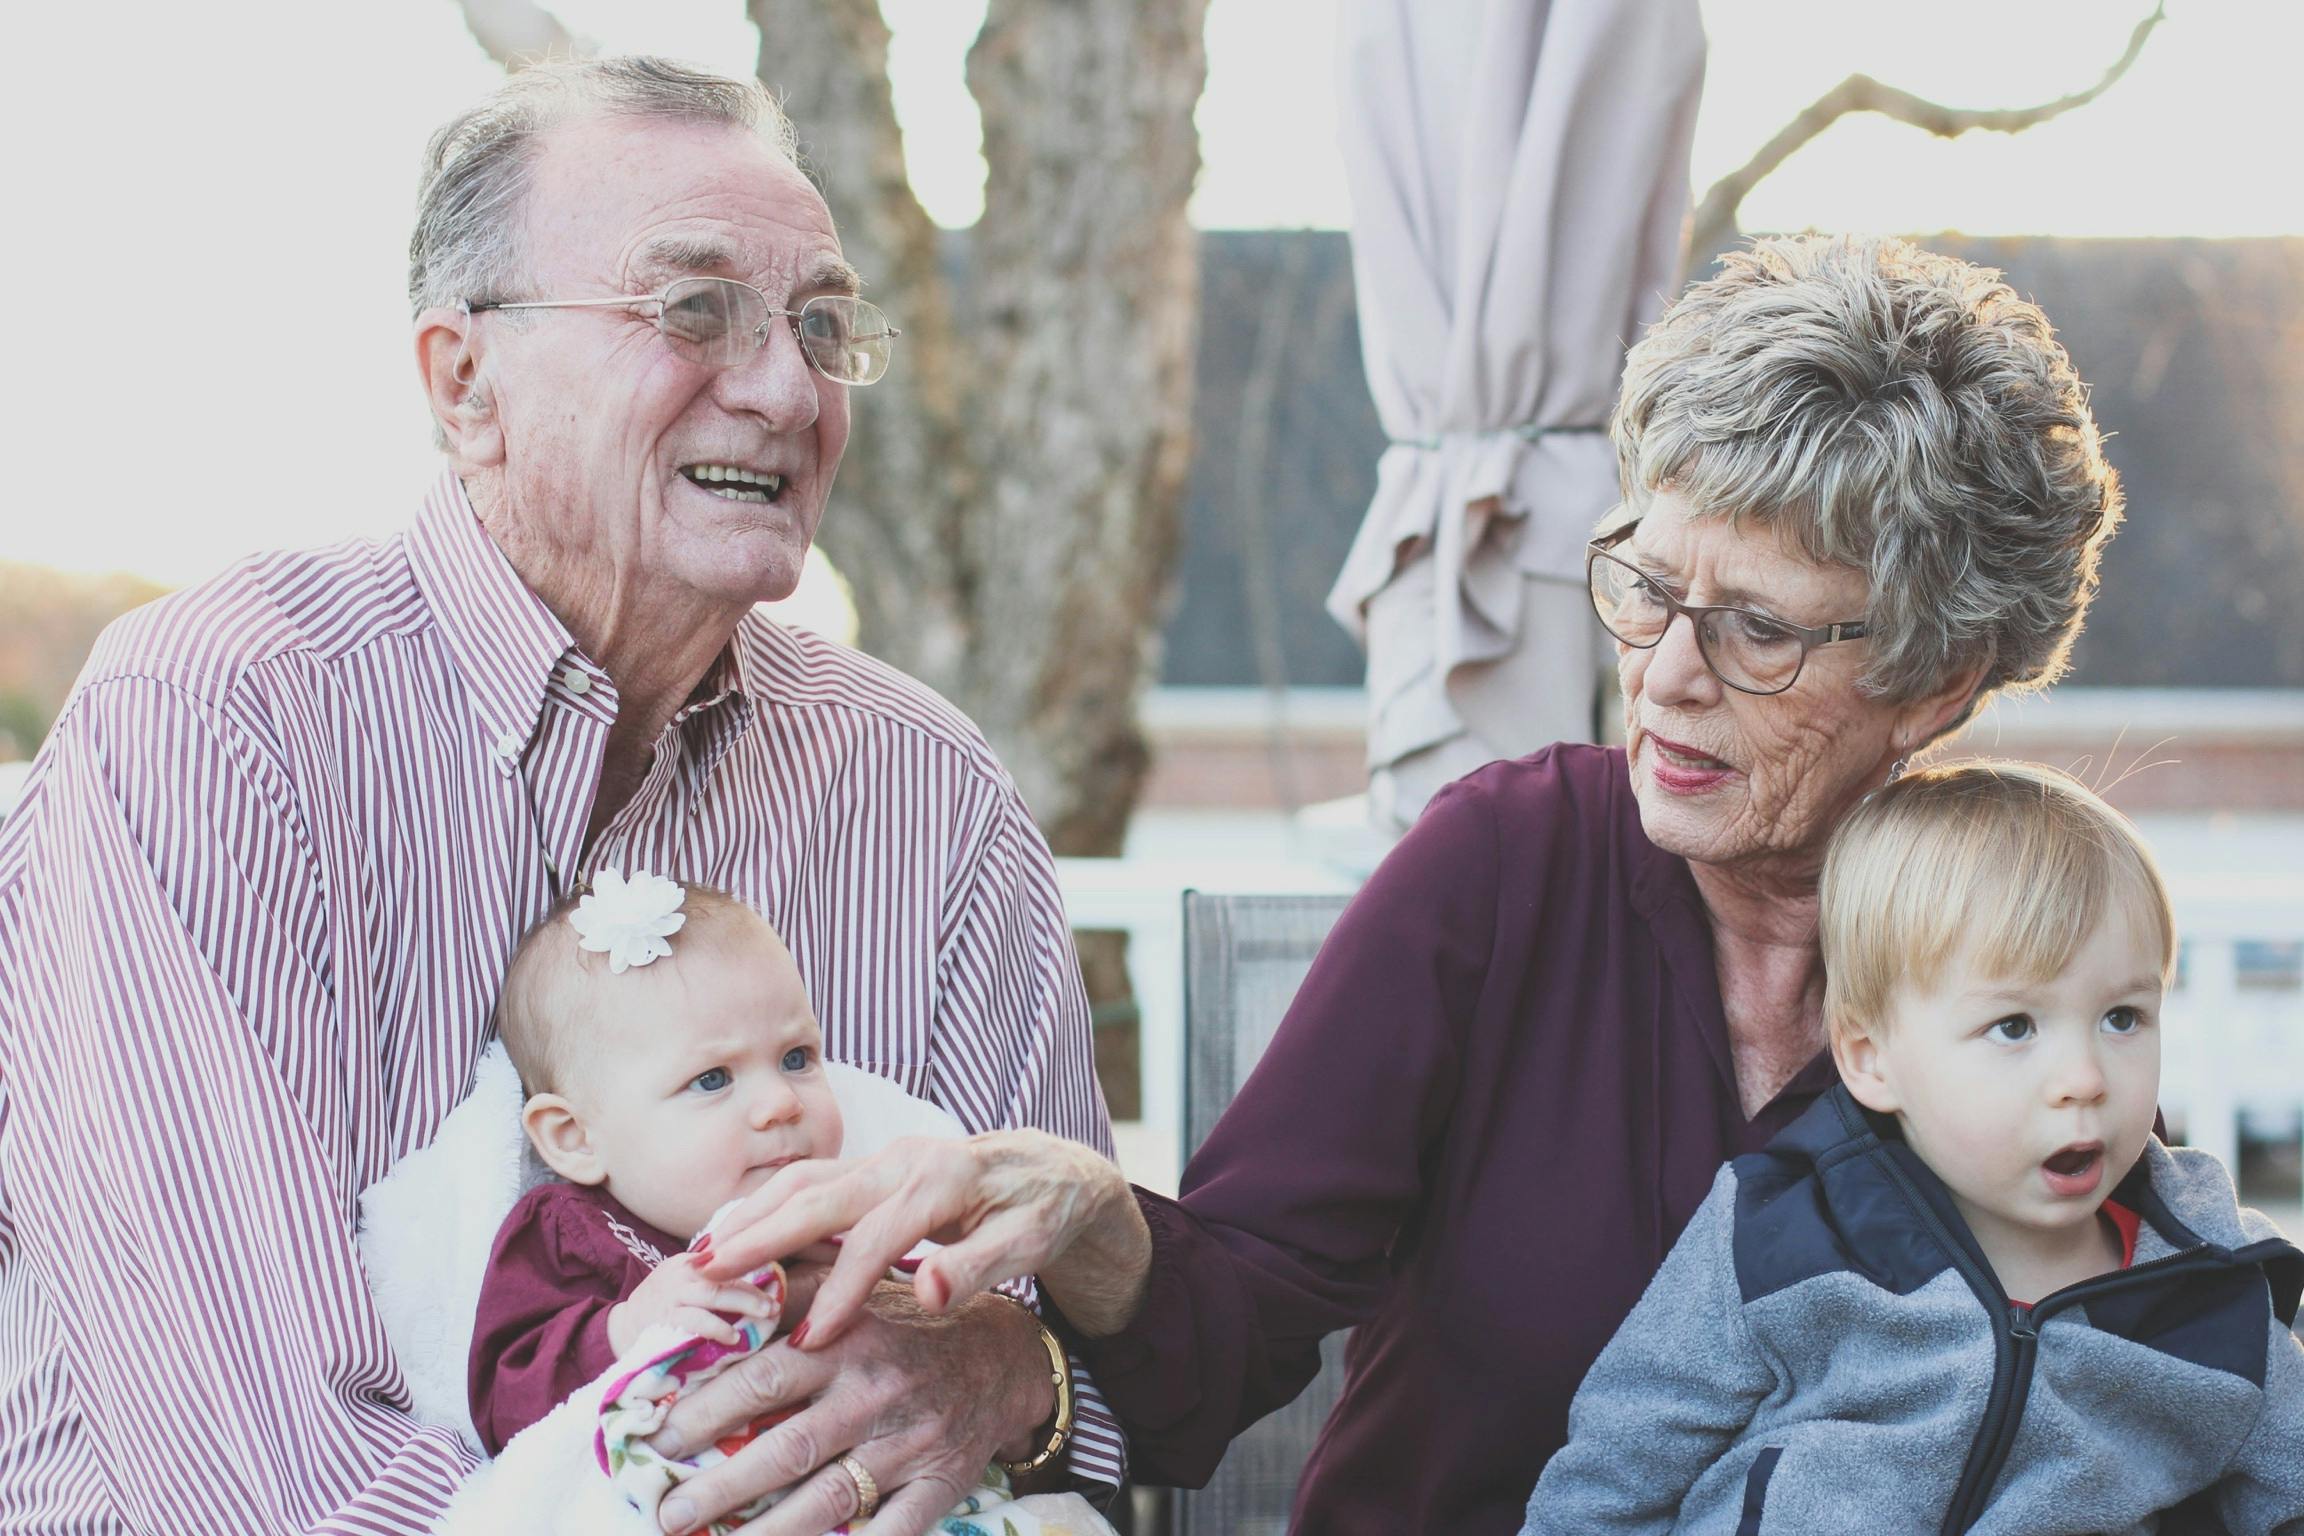 Elderly couple and their grandkids | Source: Pexels